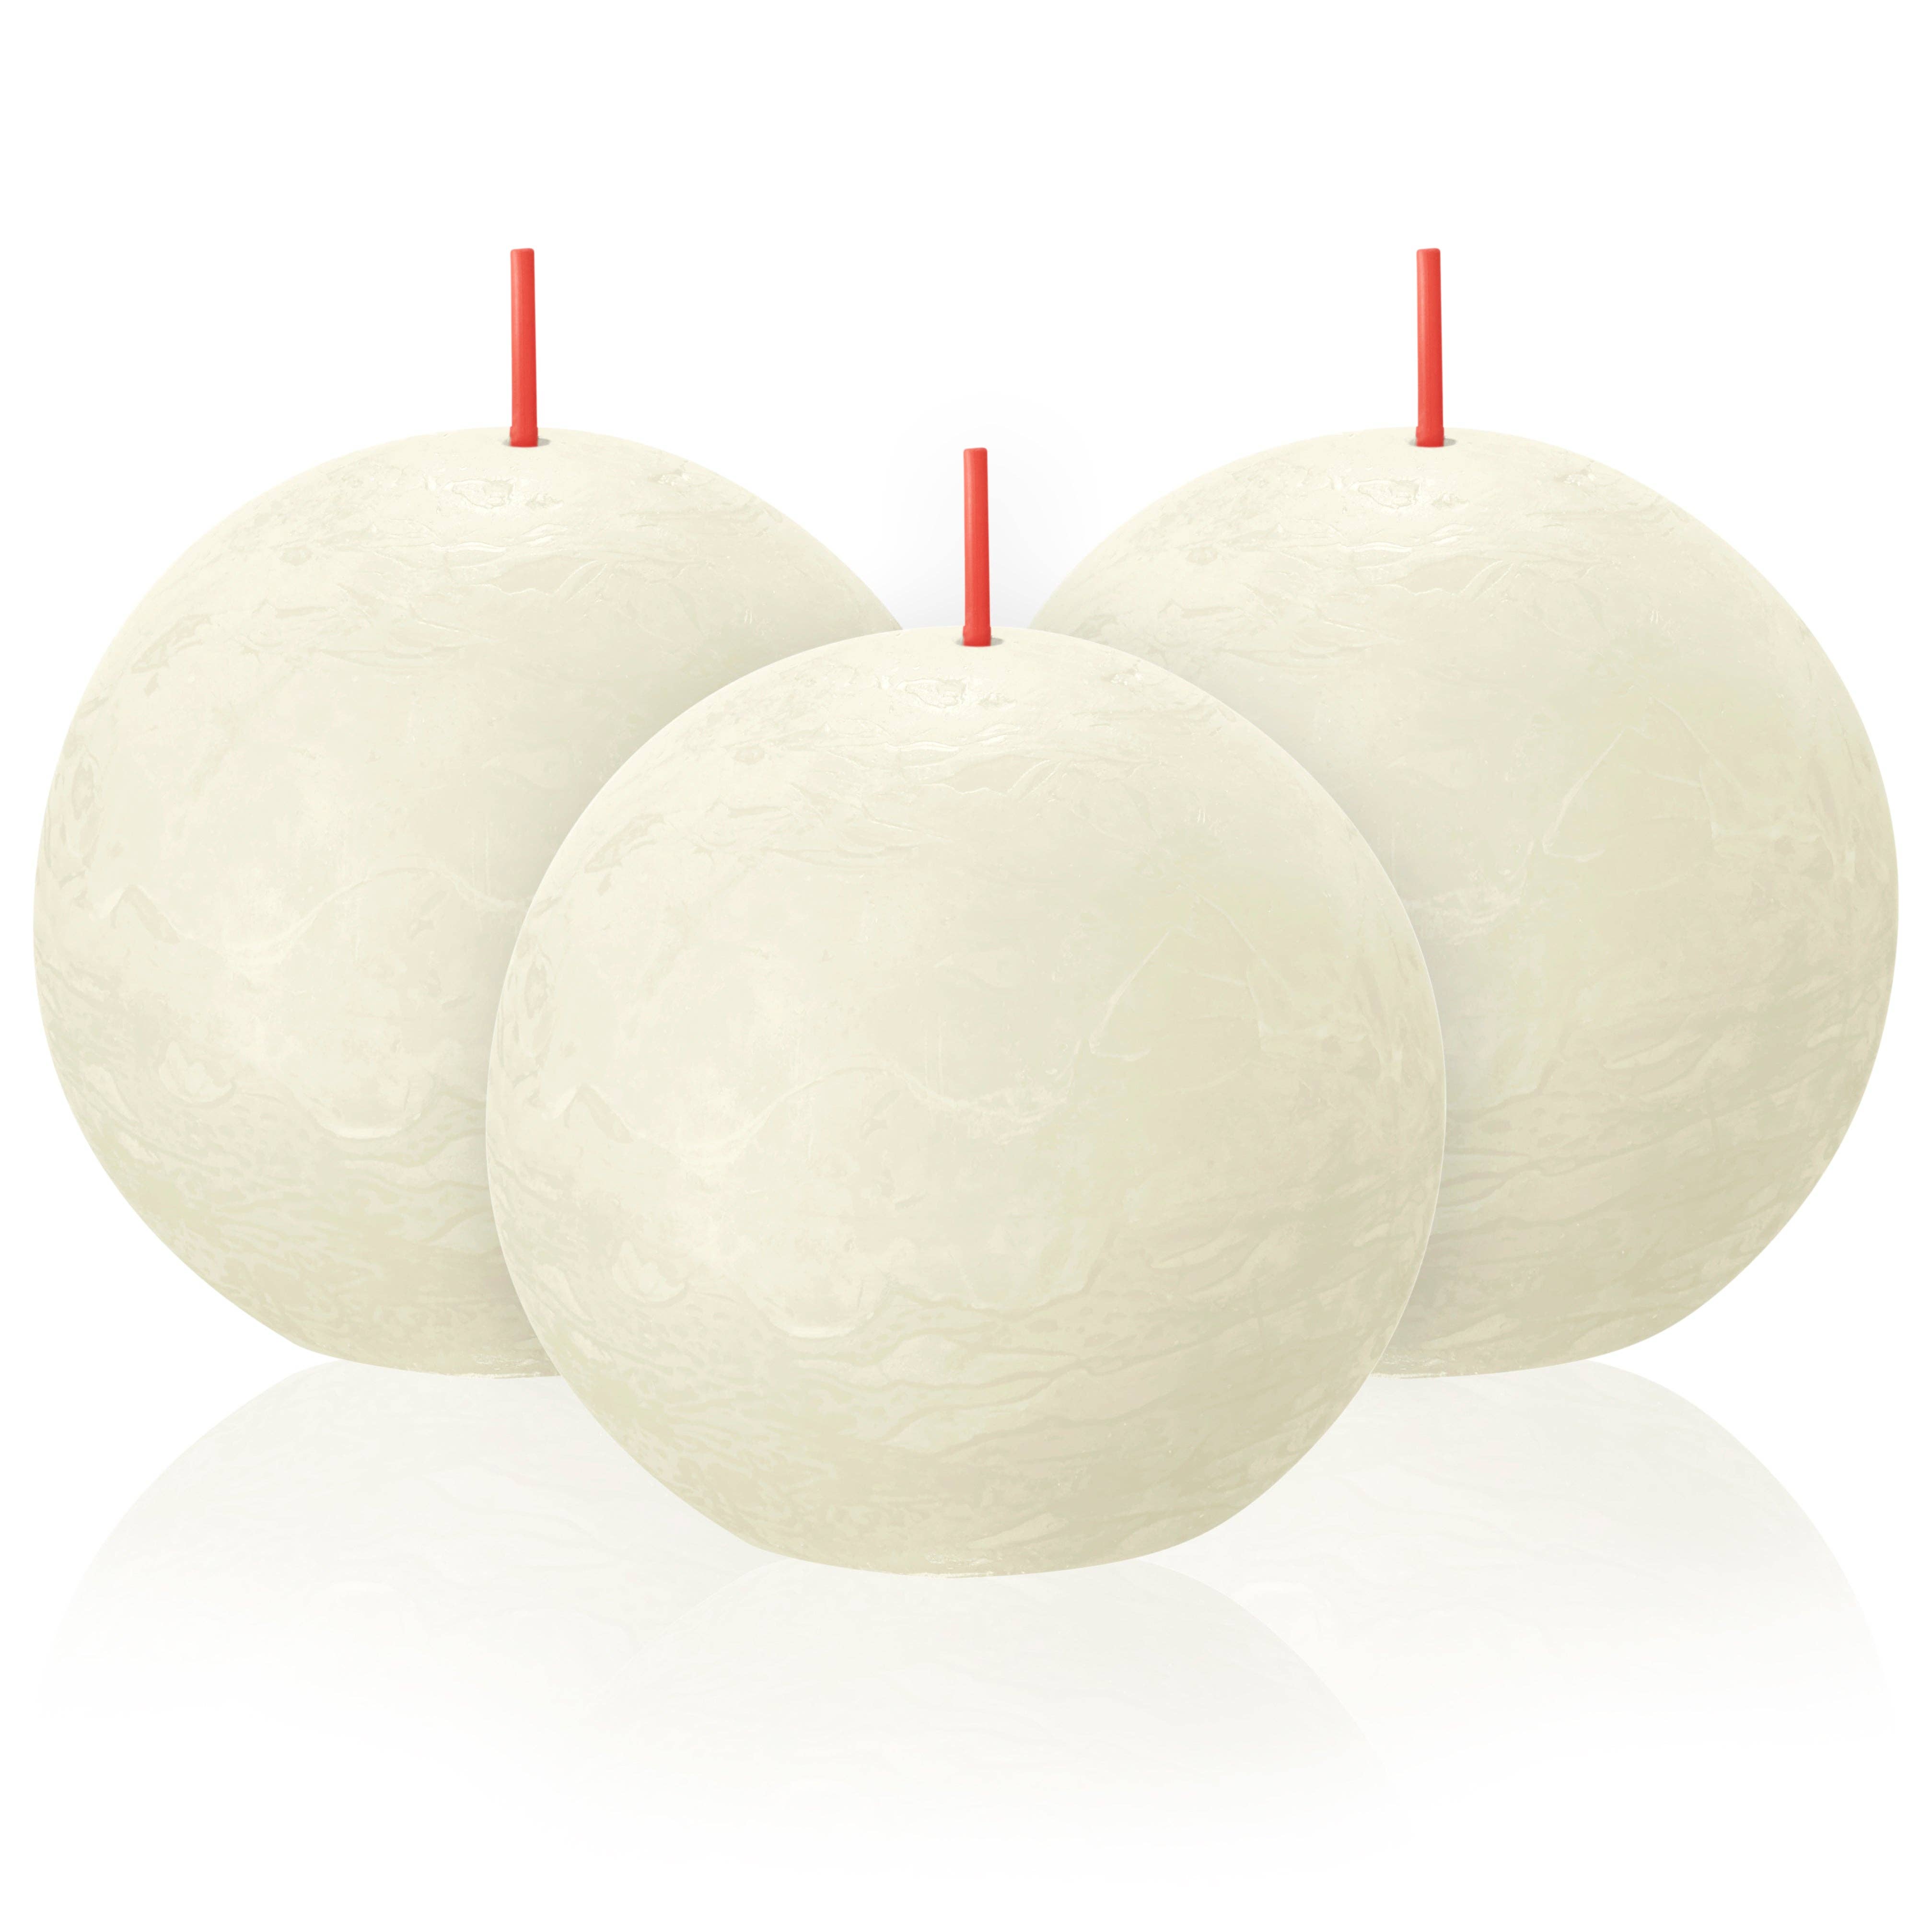 Candle: Cloudy White Rustic 3" Ball Candles (Single)